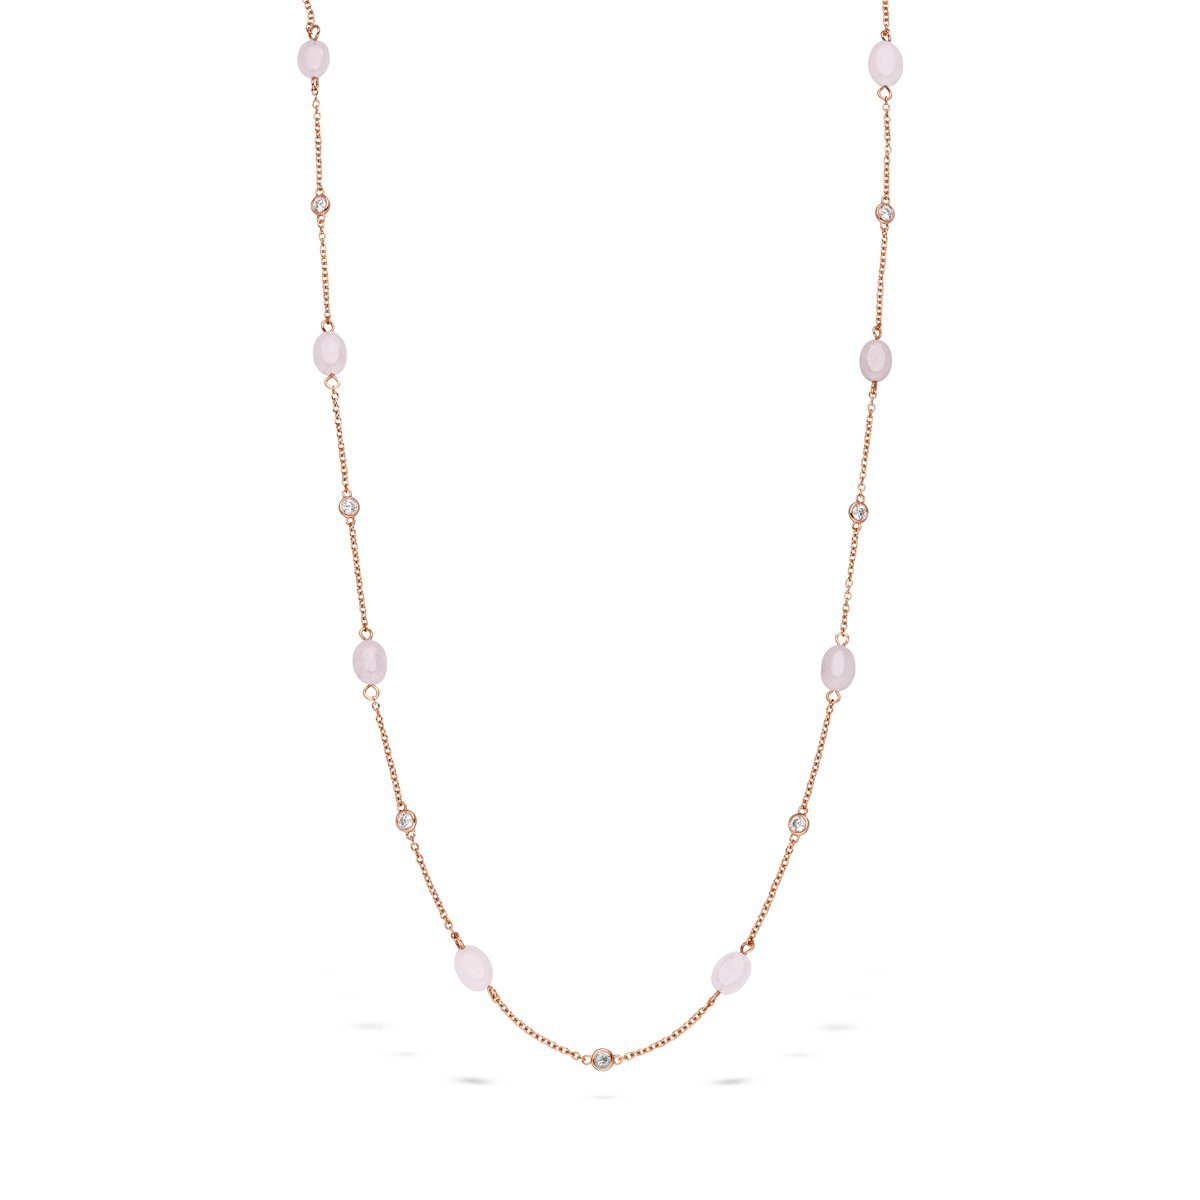 Fiocco Kette, 925 Bloomy Silber Jewelry Rose Collier